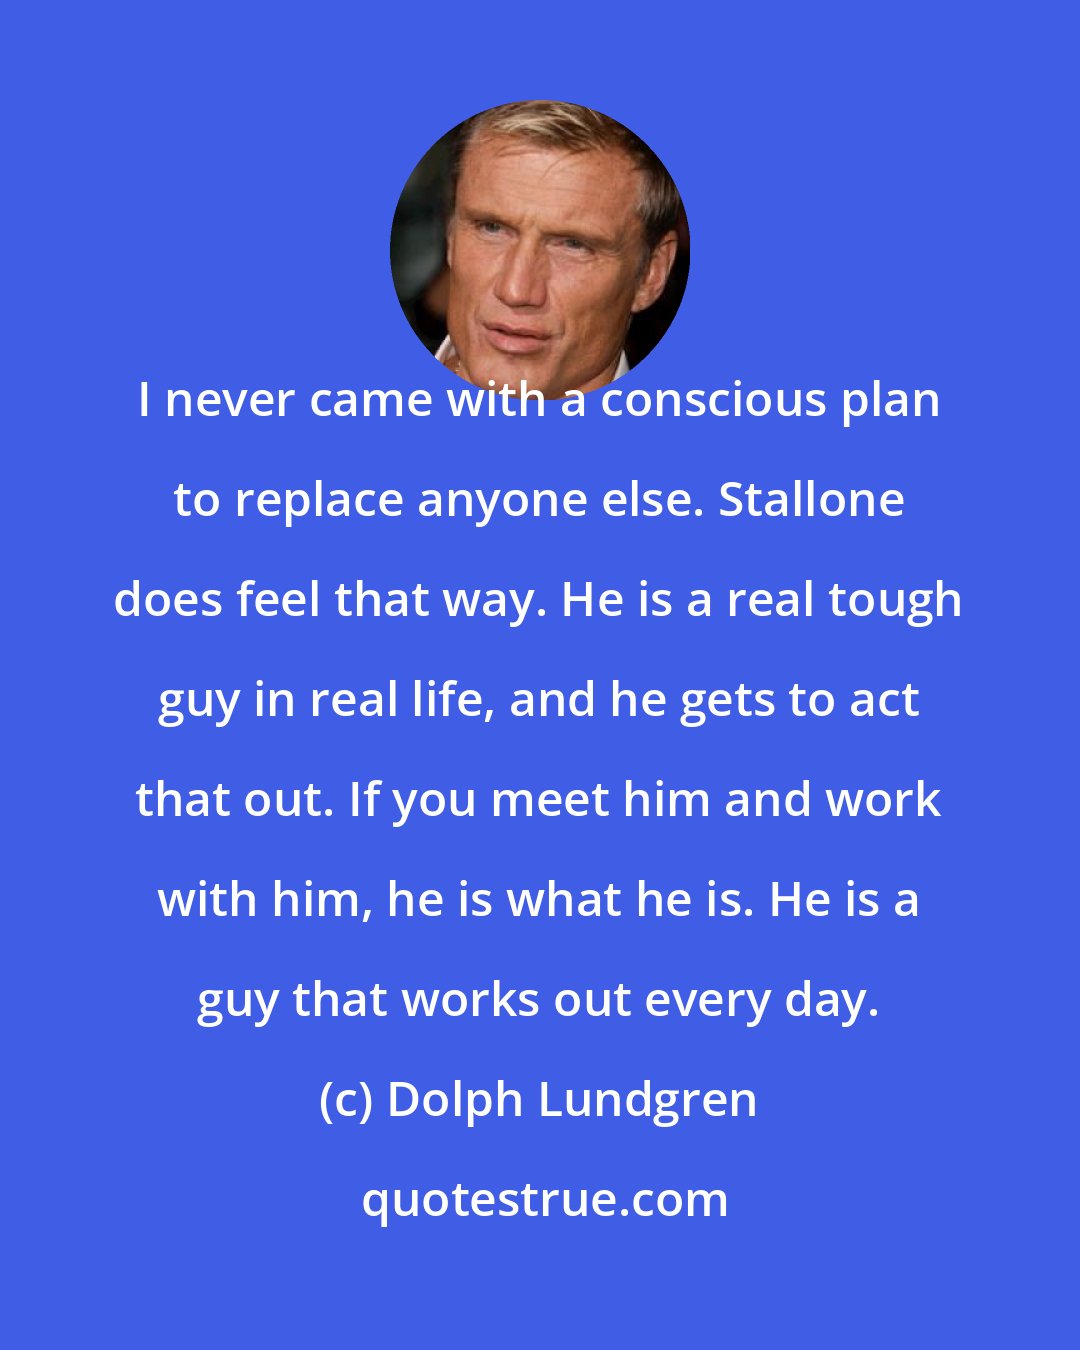 Dolph Lundgren: I never came with a conscious plan to replace anyone else. Stallone does feel that way. He is a real tough guy in real life, and he gets to act that out. If you meet him and work with him, he is what he is. He is a guy that works out every day.